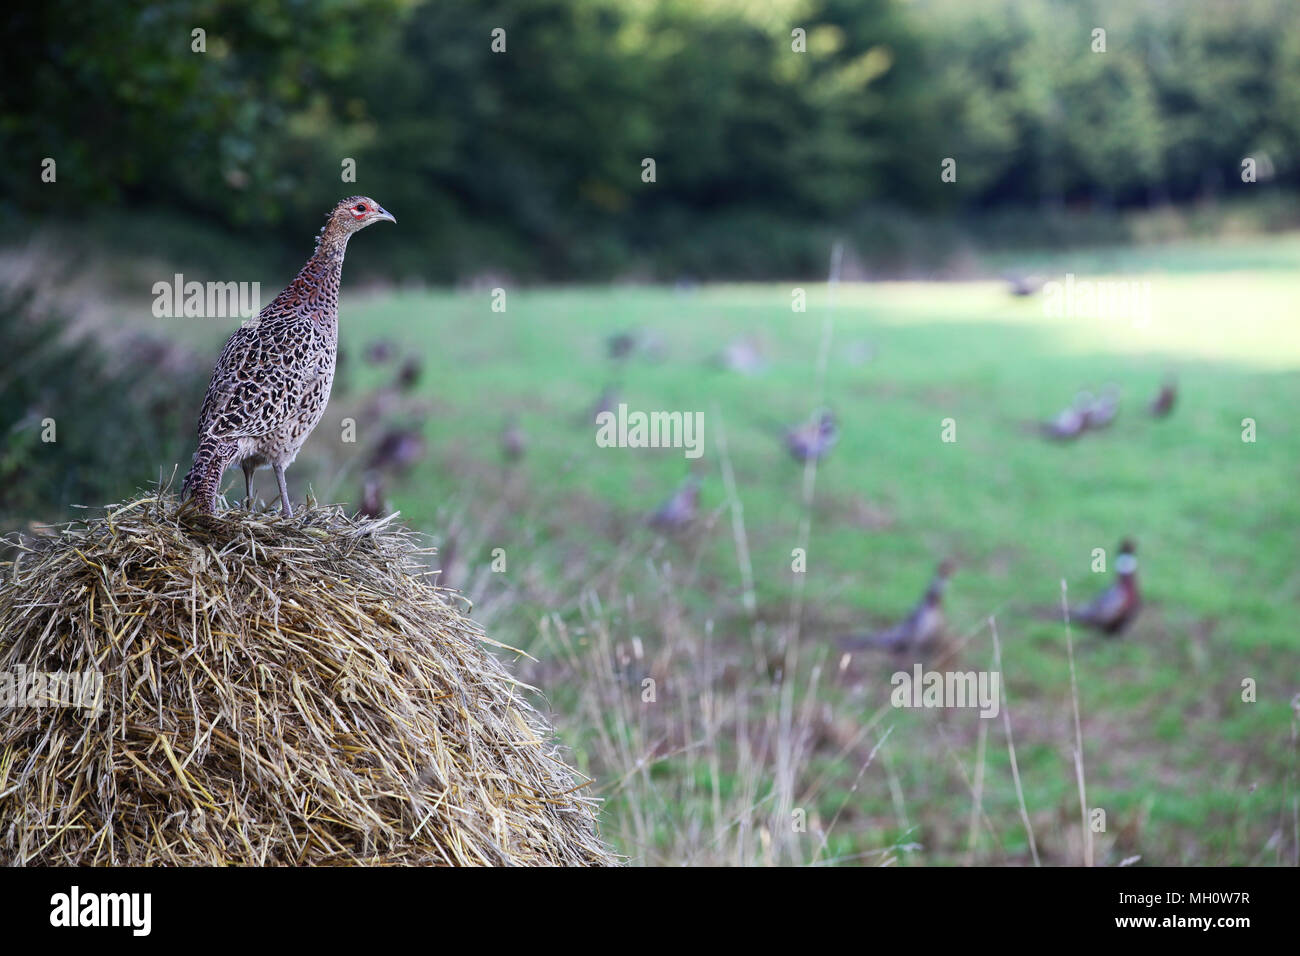 Female Pheasant [ Phasianus colchicus ] standing on staw bale with field full of Pheasants out of focus in the background Stock Photo